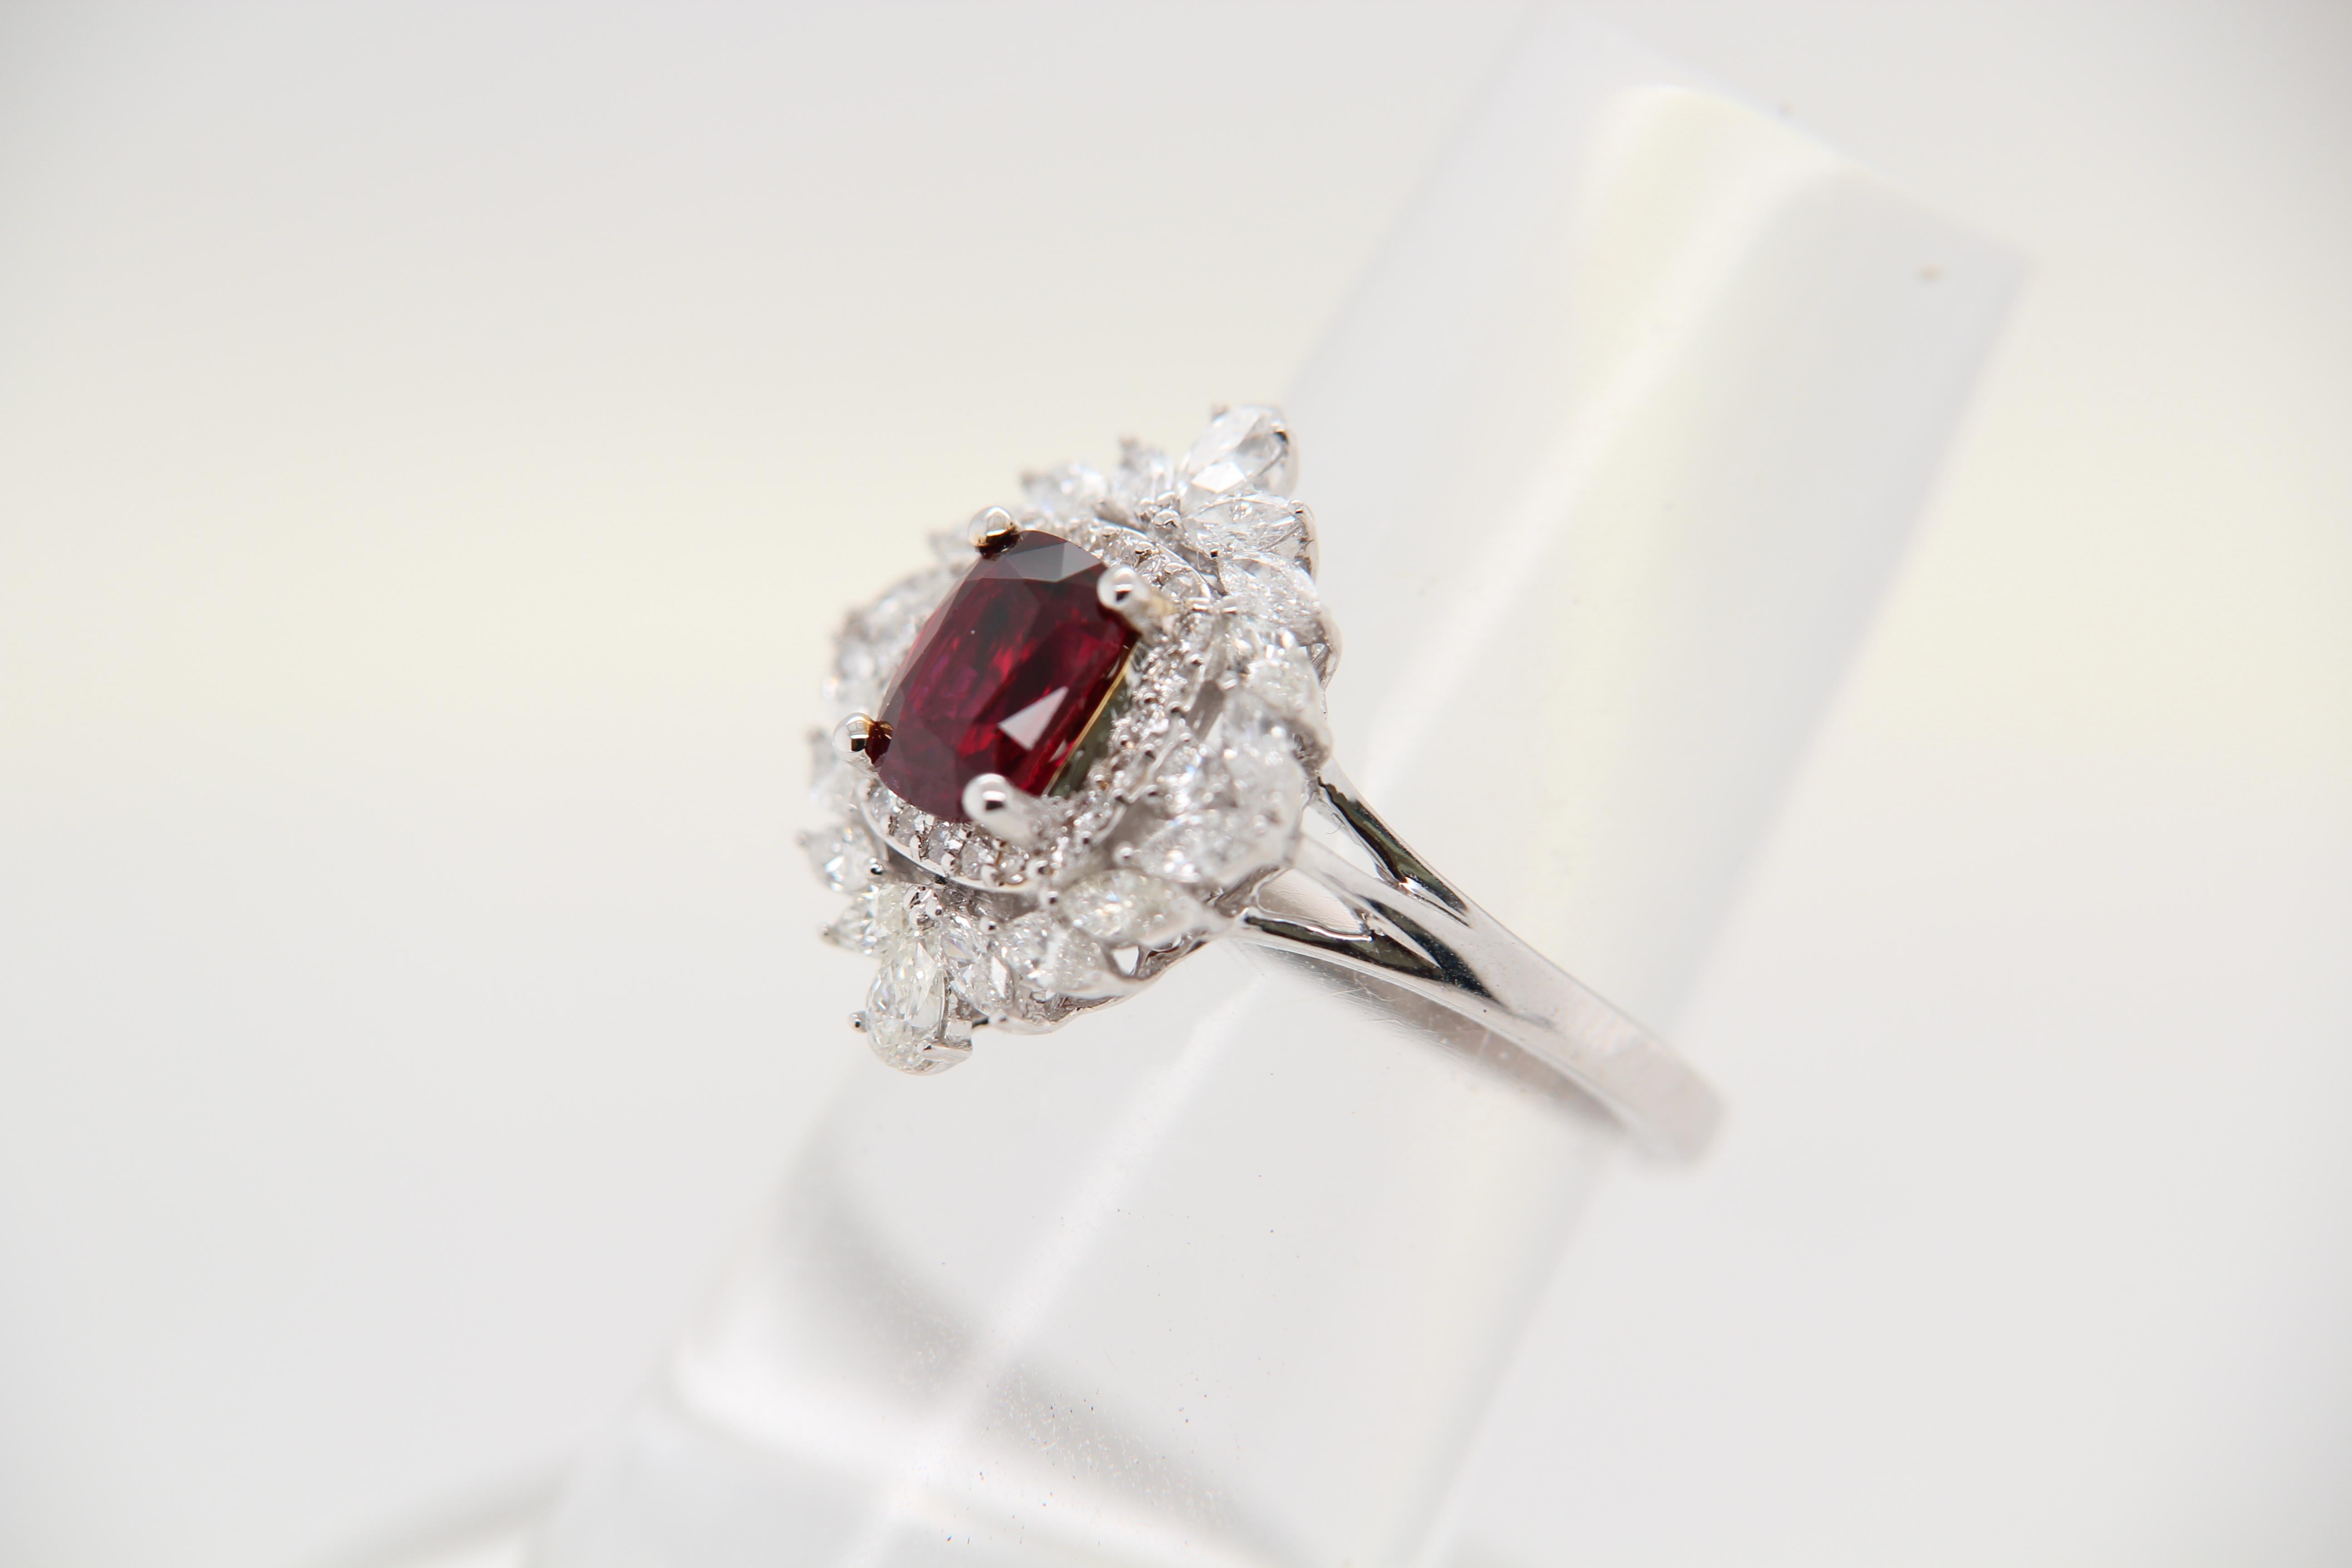 A Ruby and diamond ring. The ring's center stone is 1.34 carat pigeon blood Burmese ruby certified by GRS. The center stone is surrounded by 0.90 carat mix shaped diamonds. The ring can be resized.